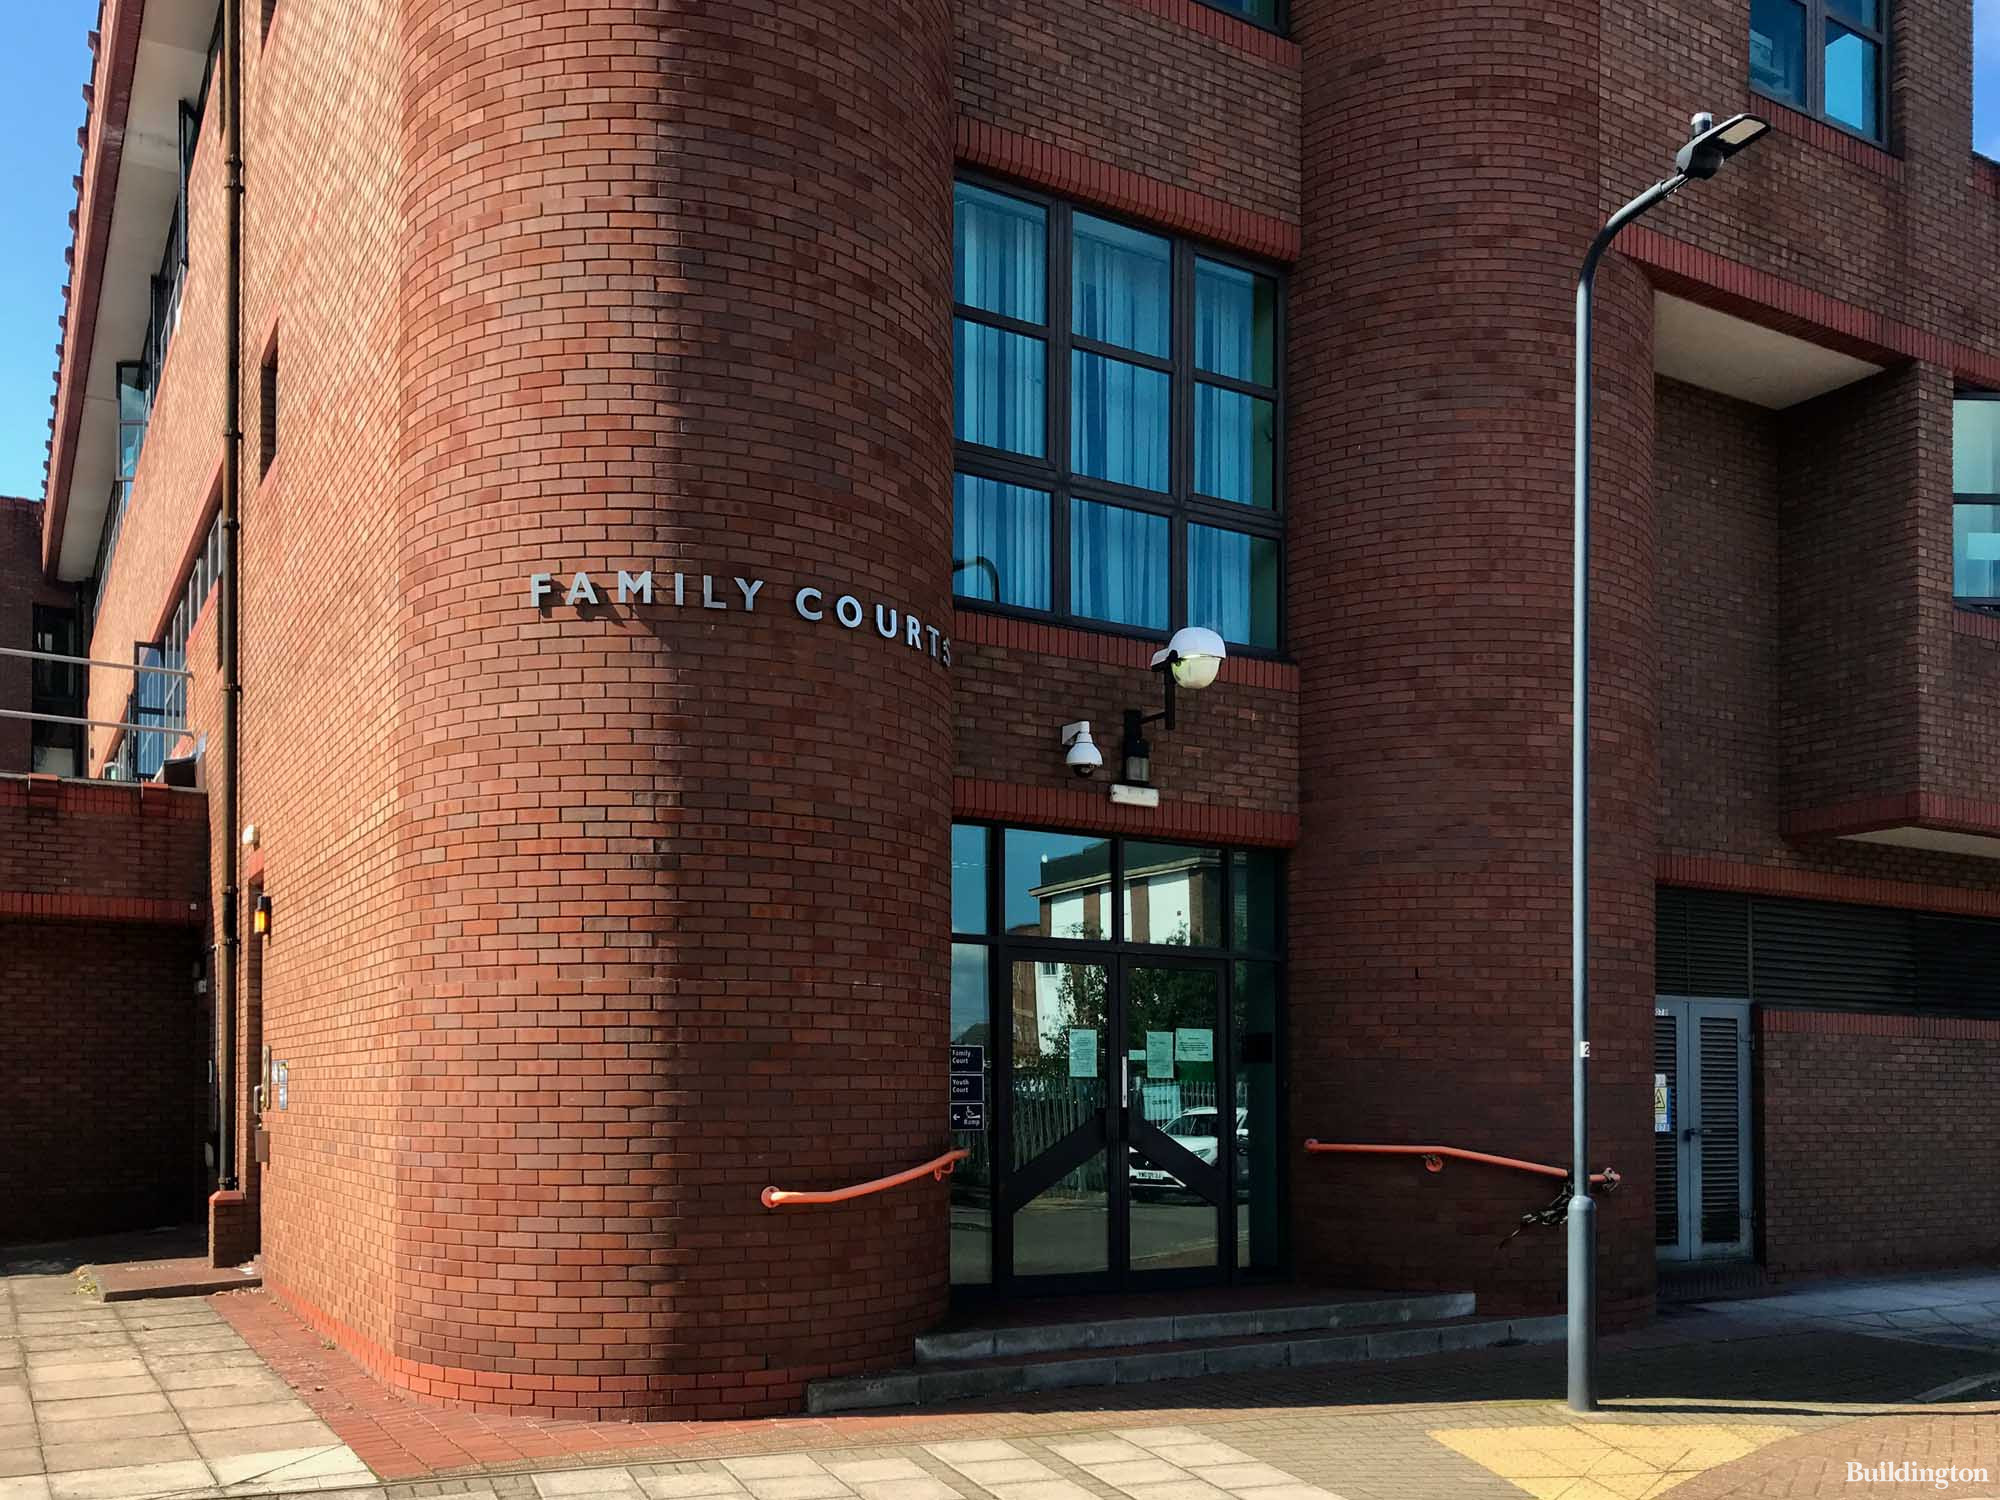 Family Courts entrance at Willesden Magistrates' Court building on Chapel Close off High Road in London NW10.